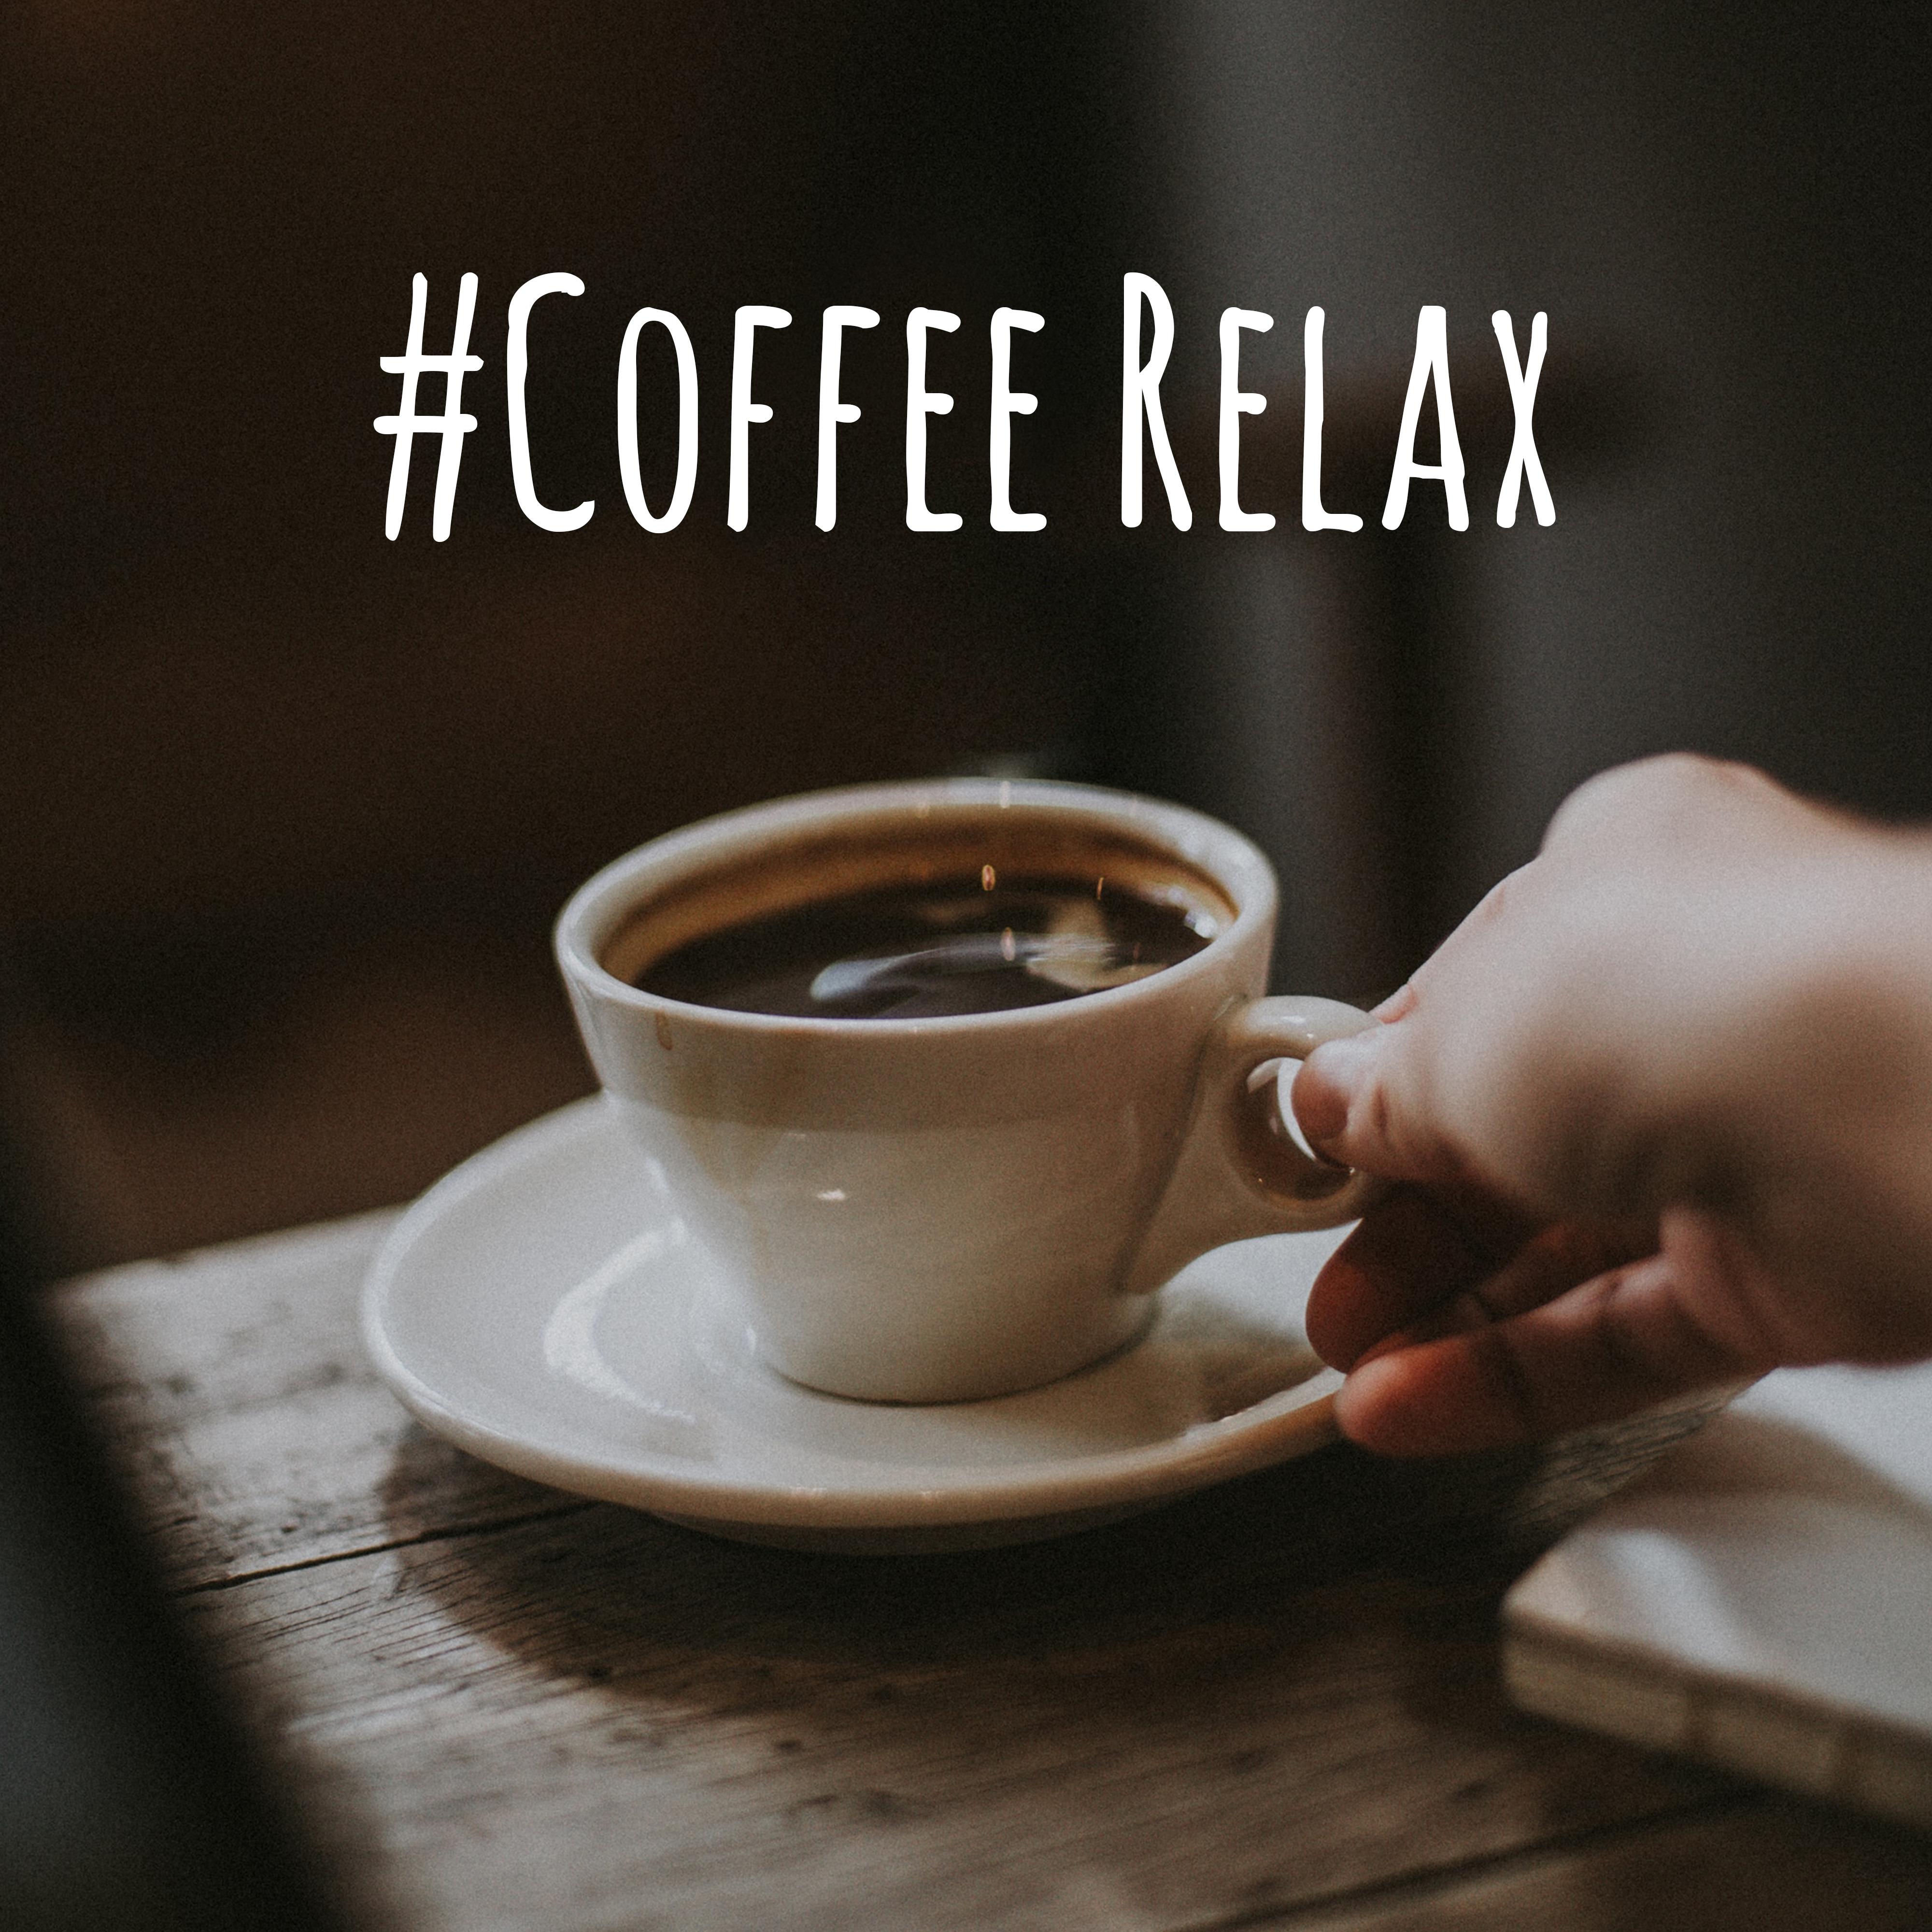 #Coffee Relax